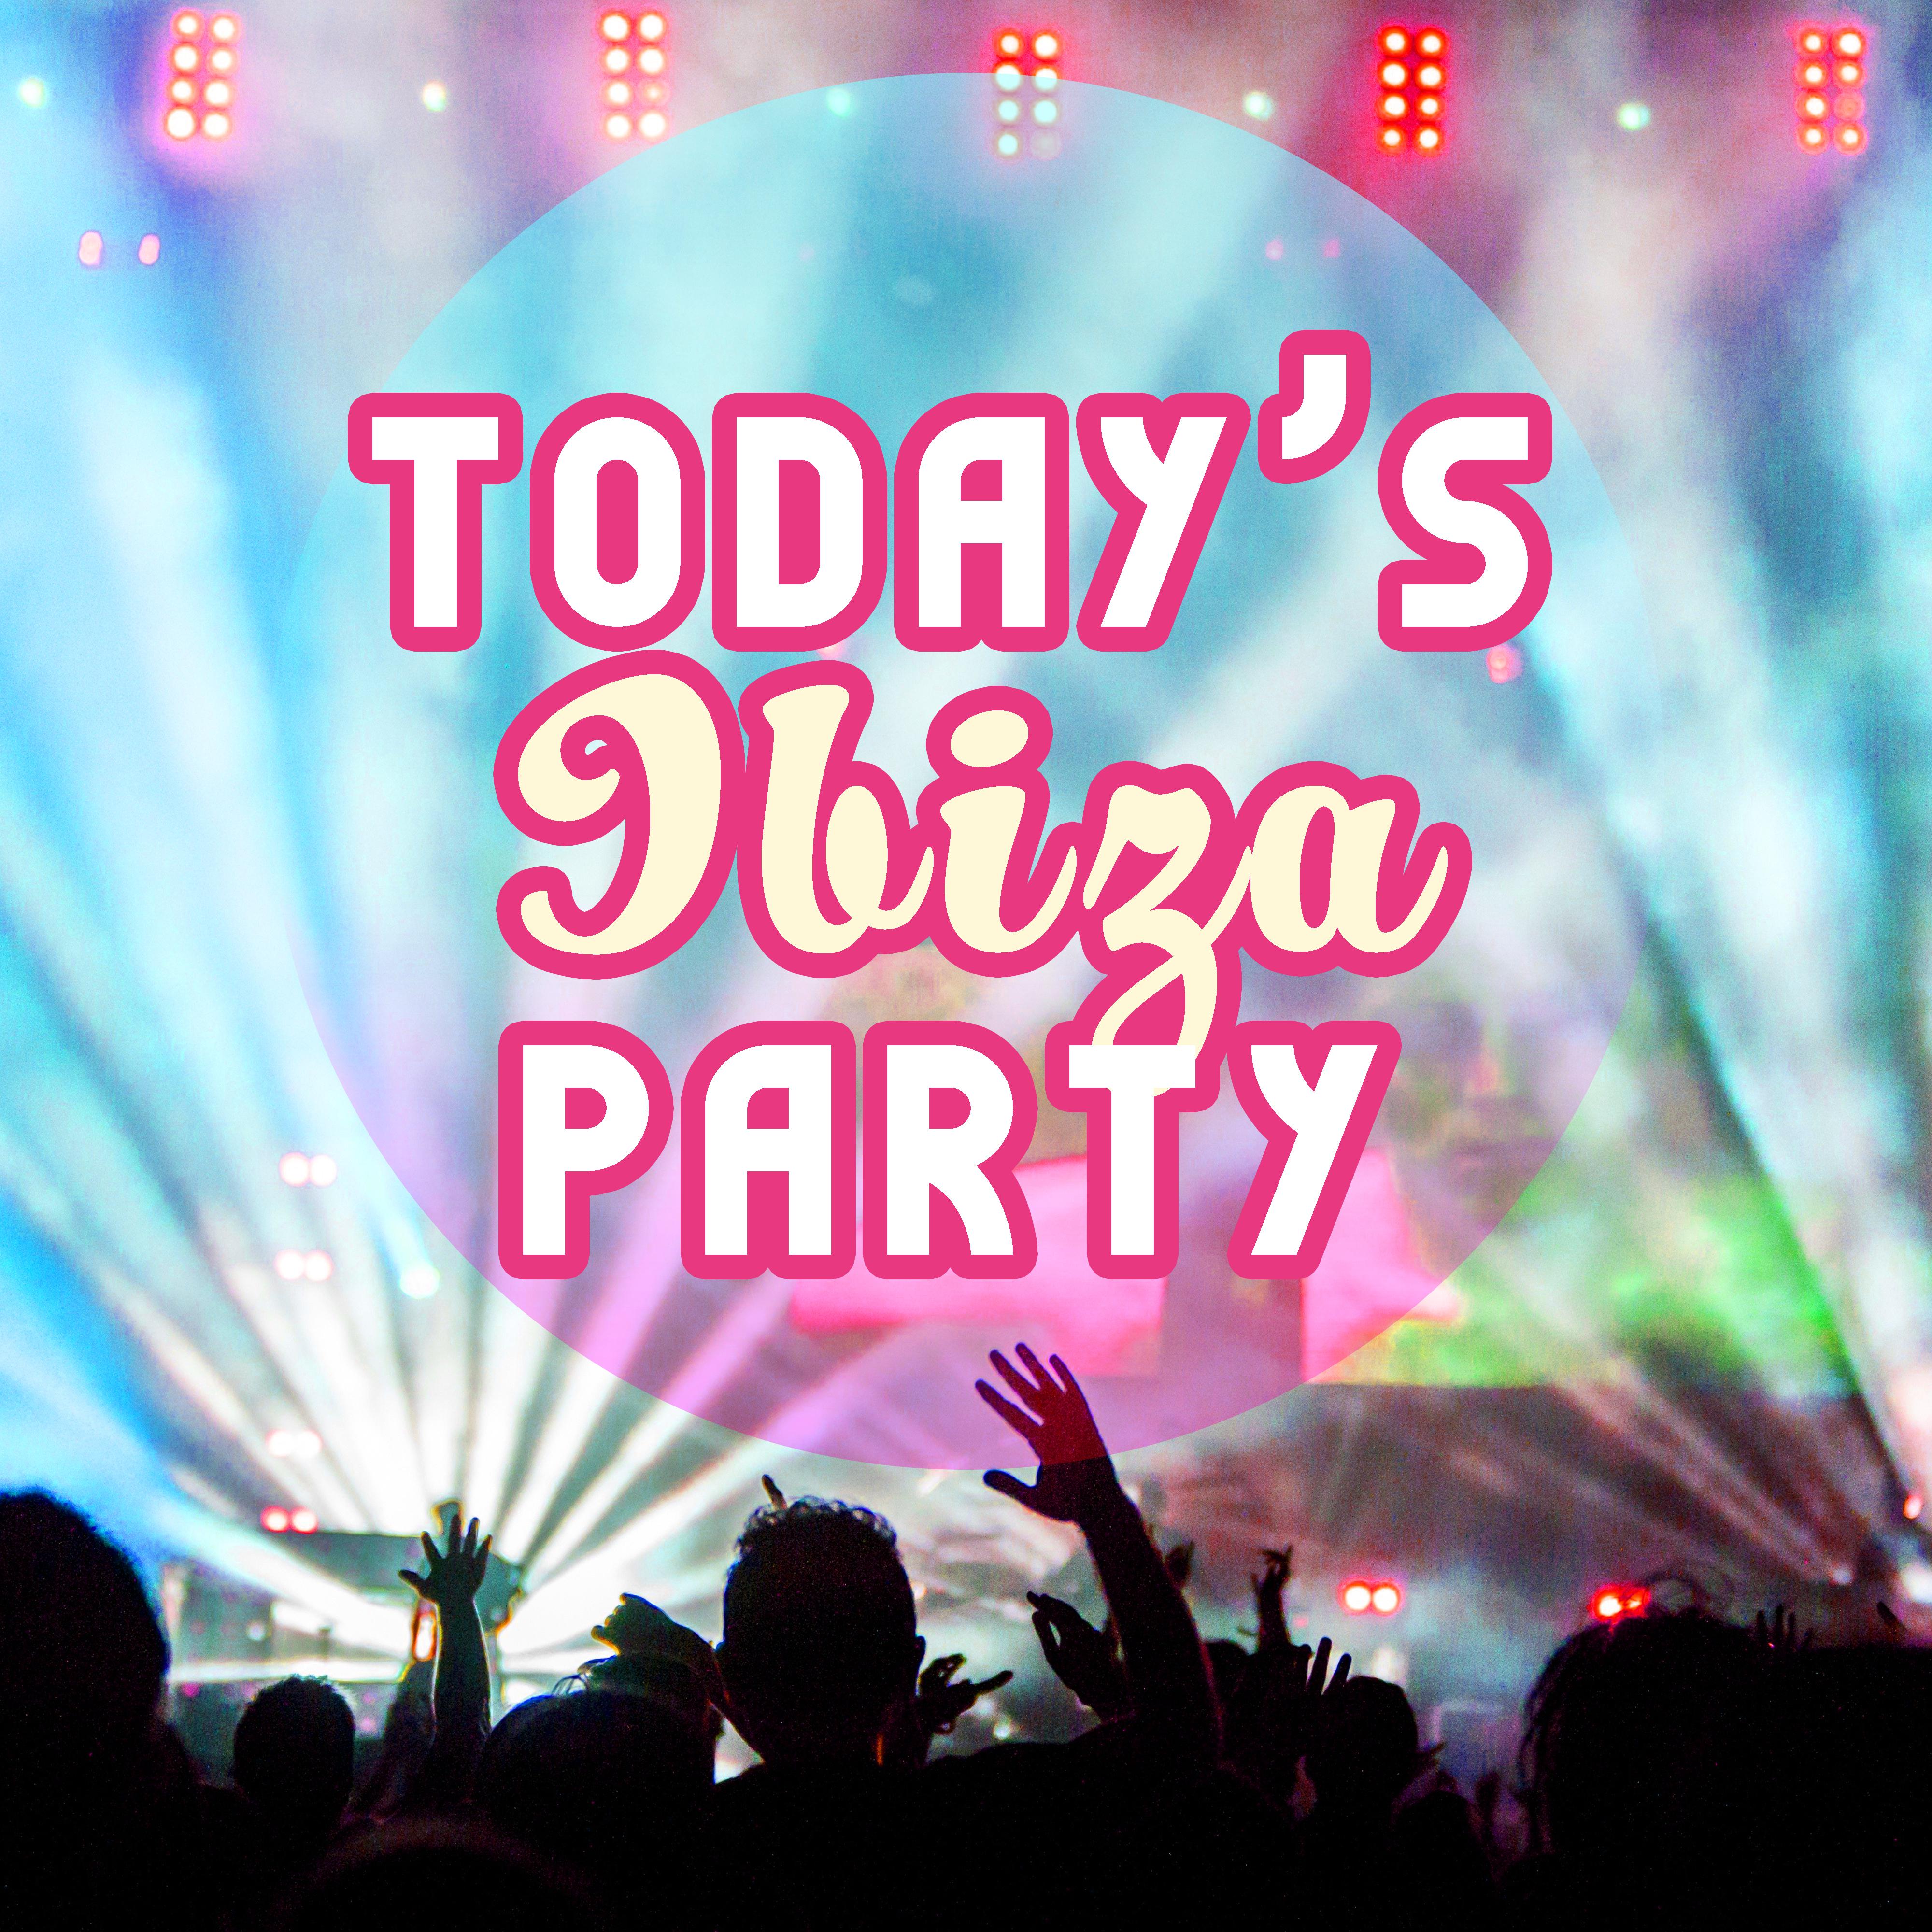 Today' s Ibiza Party  Chill Out 2017, Ibiza, Party Hits 2017, Dance Music, Lounge 69, Chillout Melodies